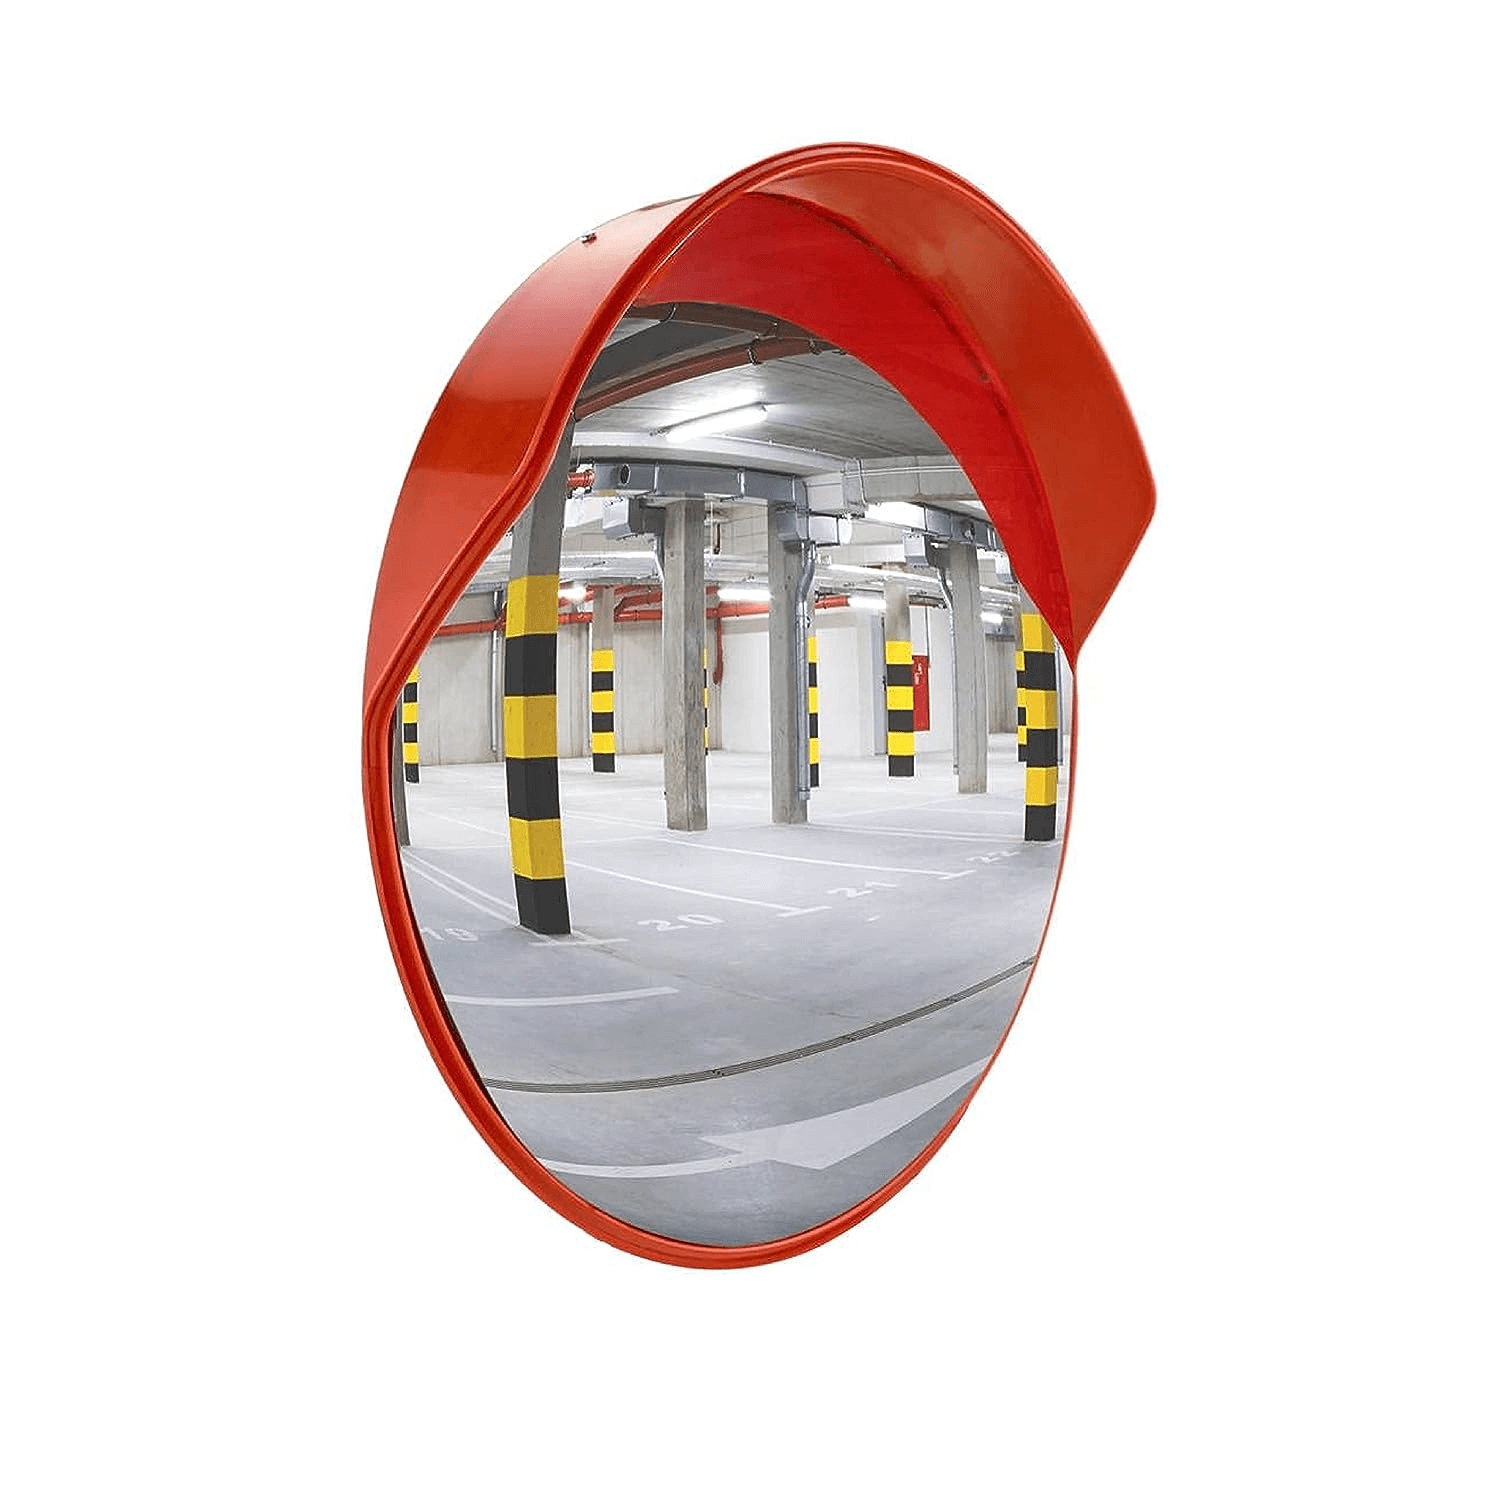 robustt-unbreakable-40-inch-convex-mirror-for-road-safety-traffic-security-with-installation-kit-rearview-radar-mirror